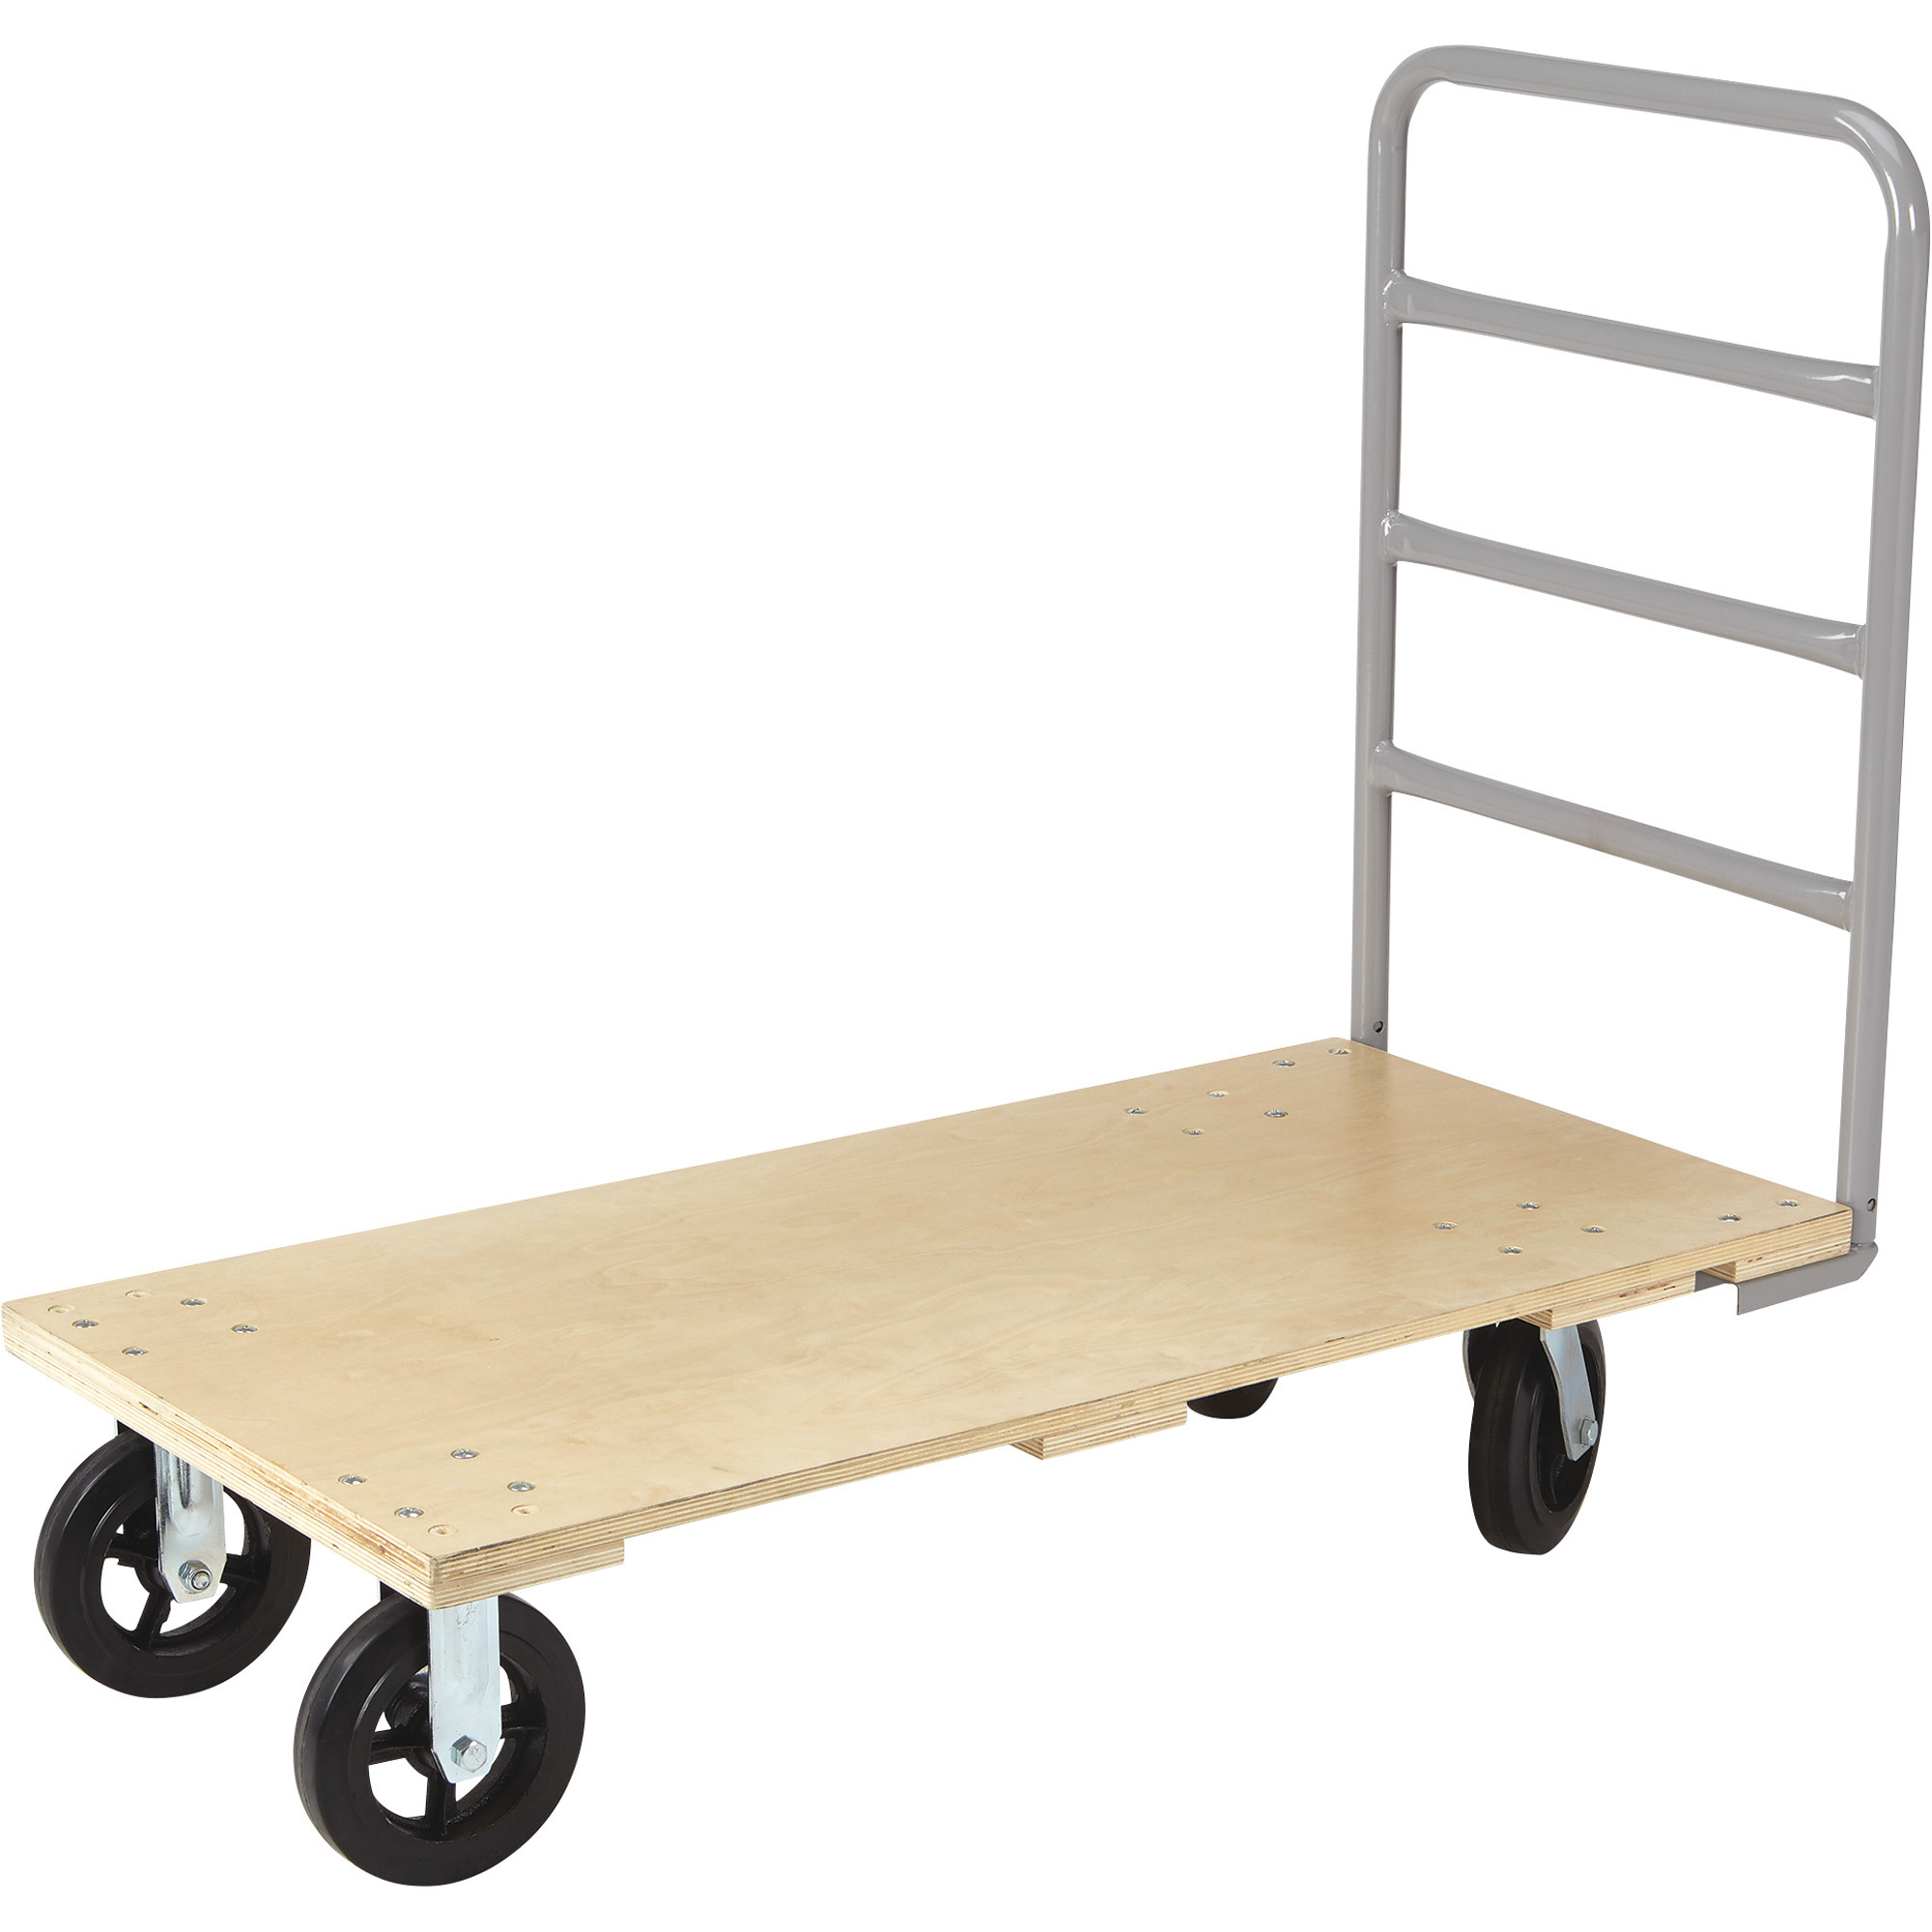 Strongway Wood Deck Platform Cart, 2000-Lb. Capacity, 48Inch L x 24Inch W, 8Inch Casters